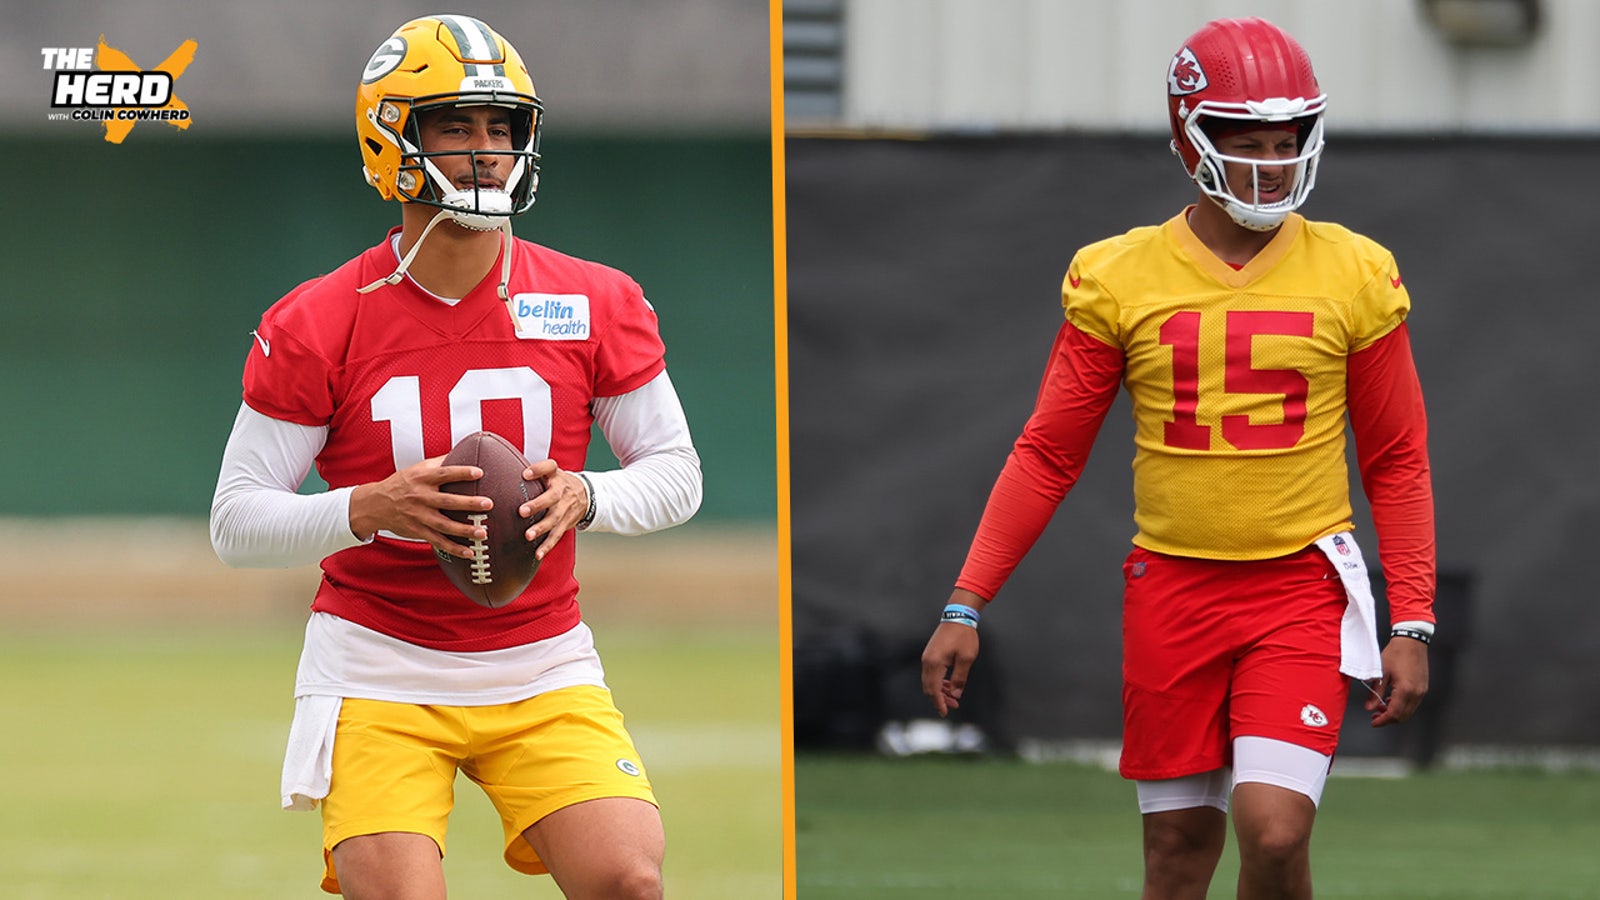 Why Jordan Love's situation does not resemble Patrick Mahomes' rookie year